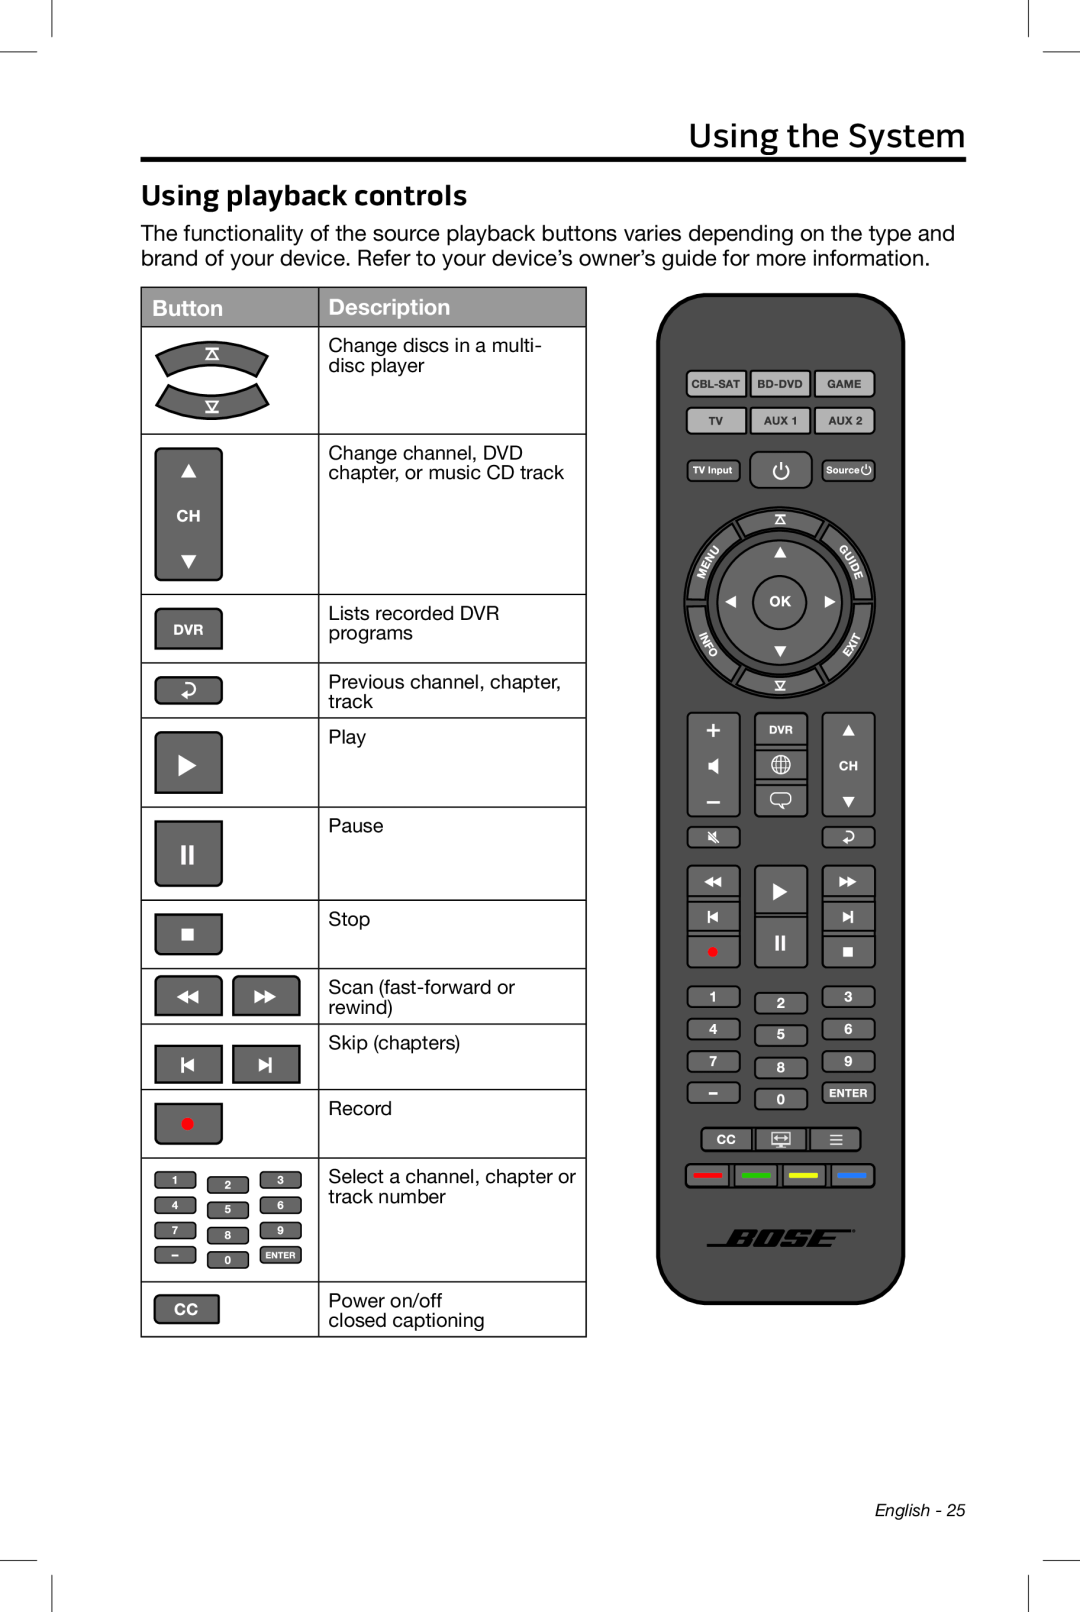 Bose CineMate 15/10 manual Using the System, Using playback controls, Button, Description 